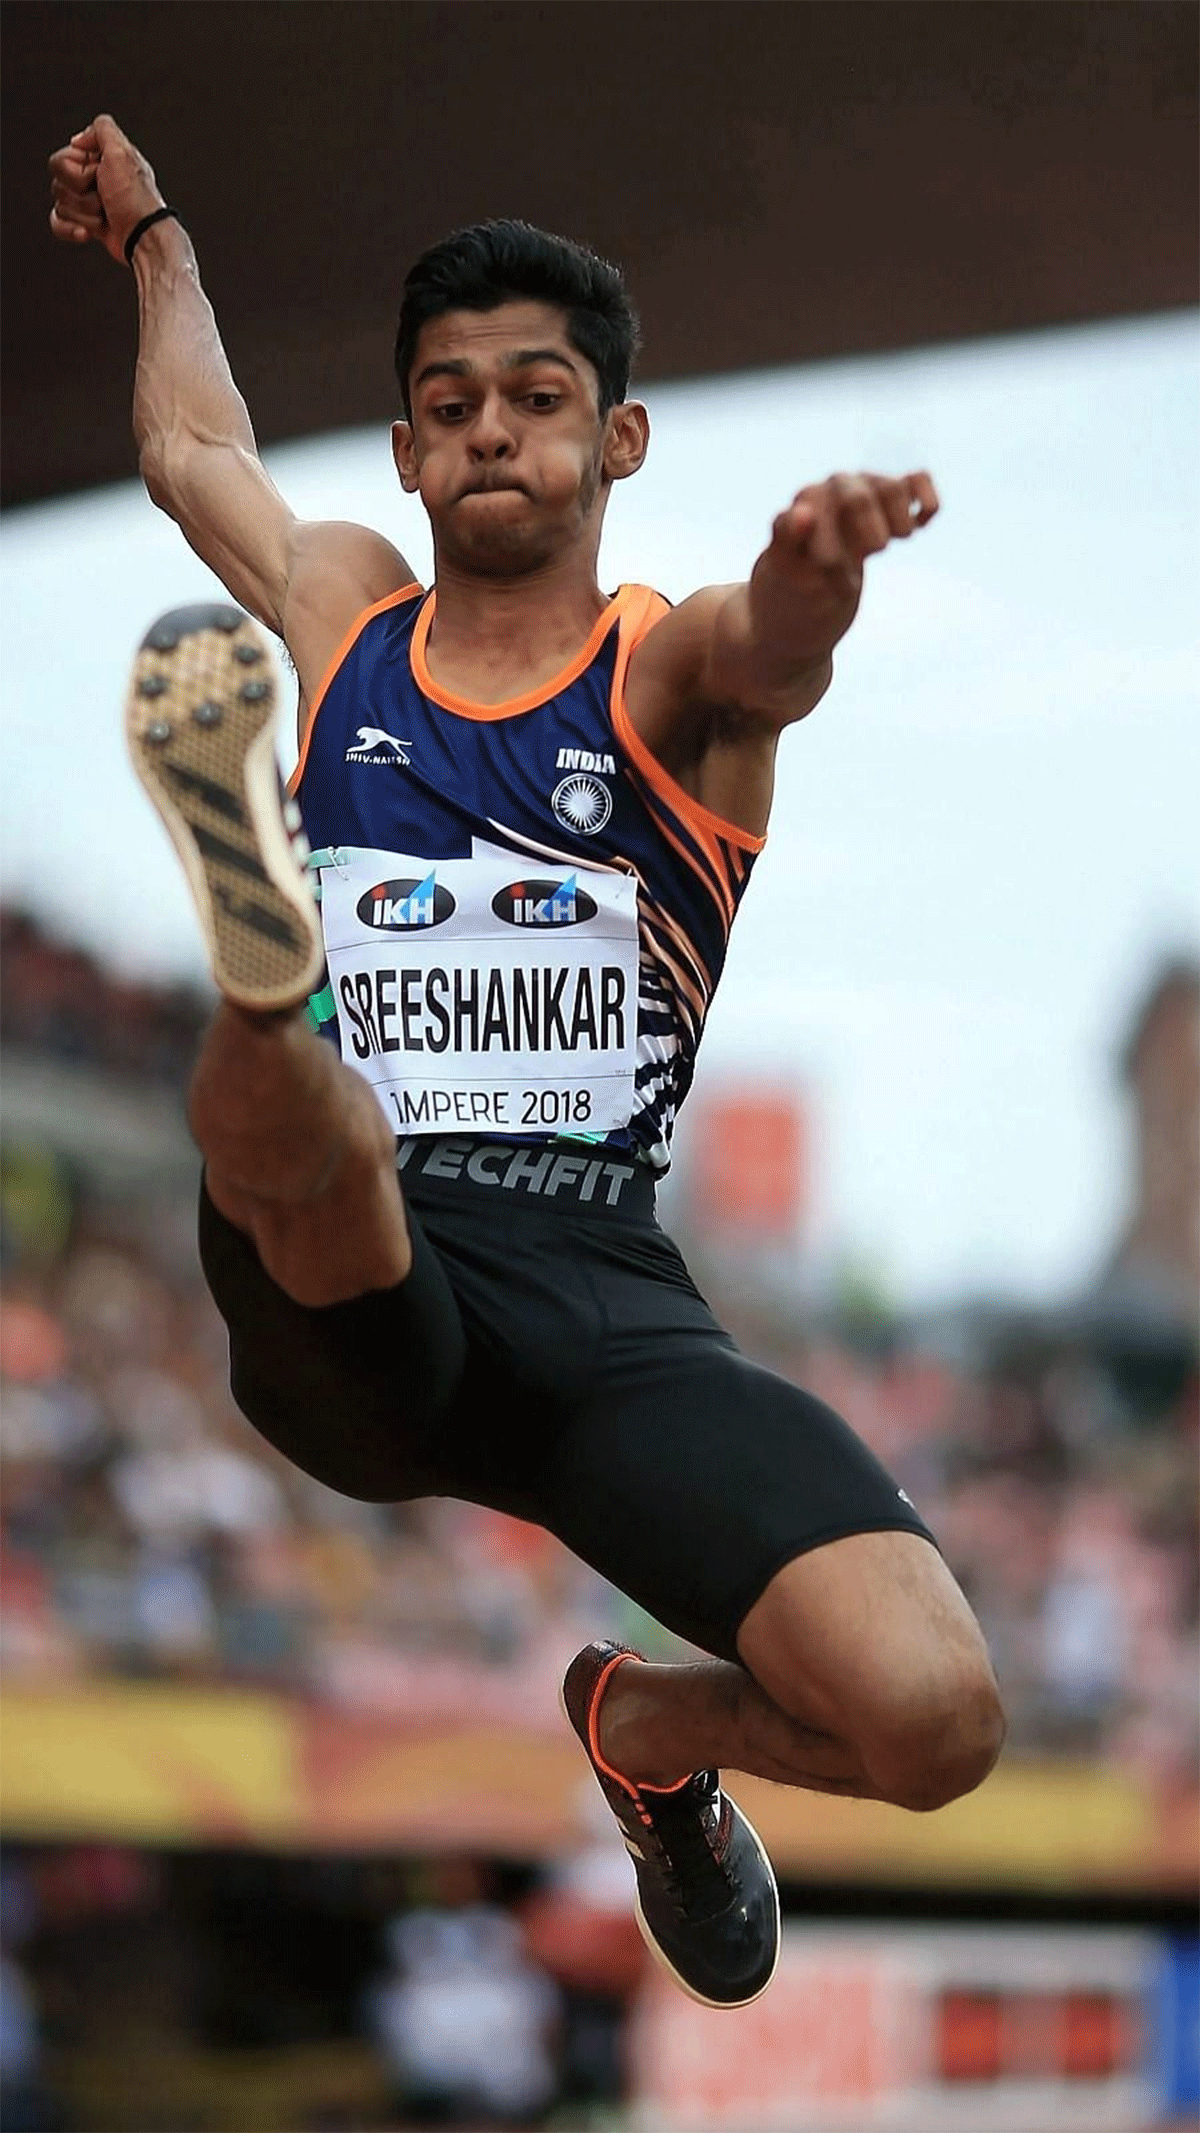 India's Sreeshankar came into the competition on back of his excellent domestic form where he repeatedly breached the 8m mark